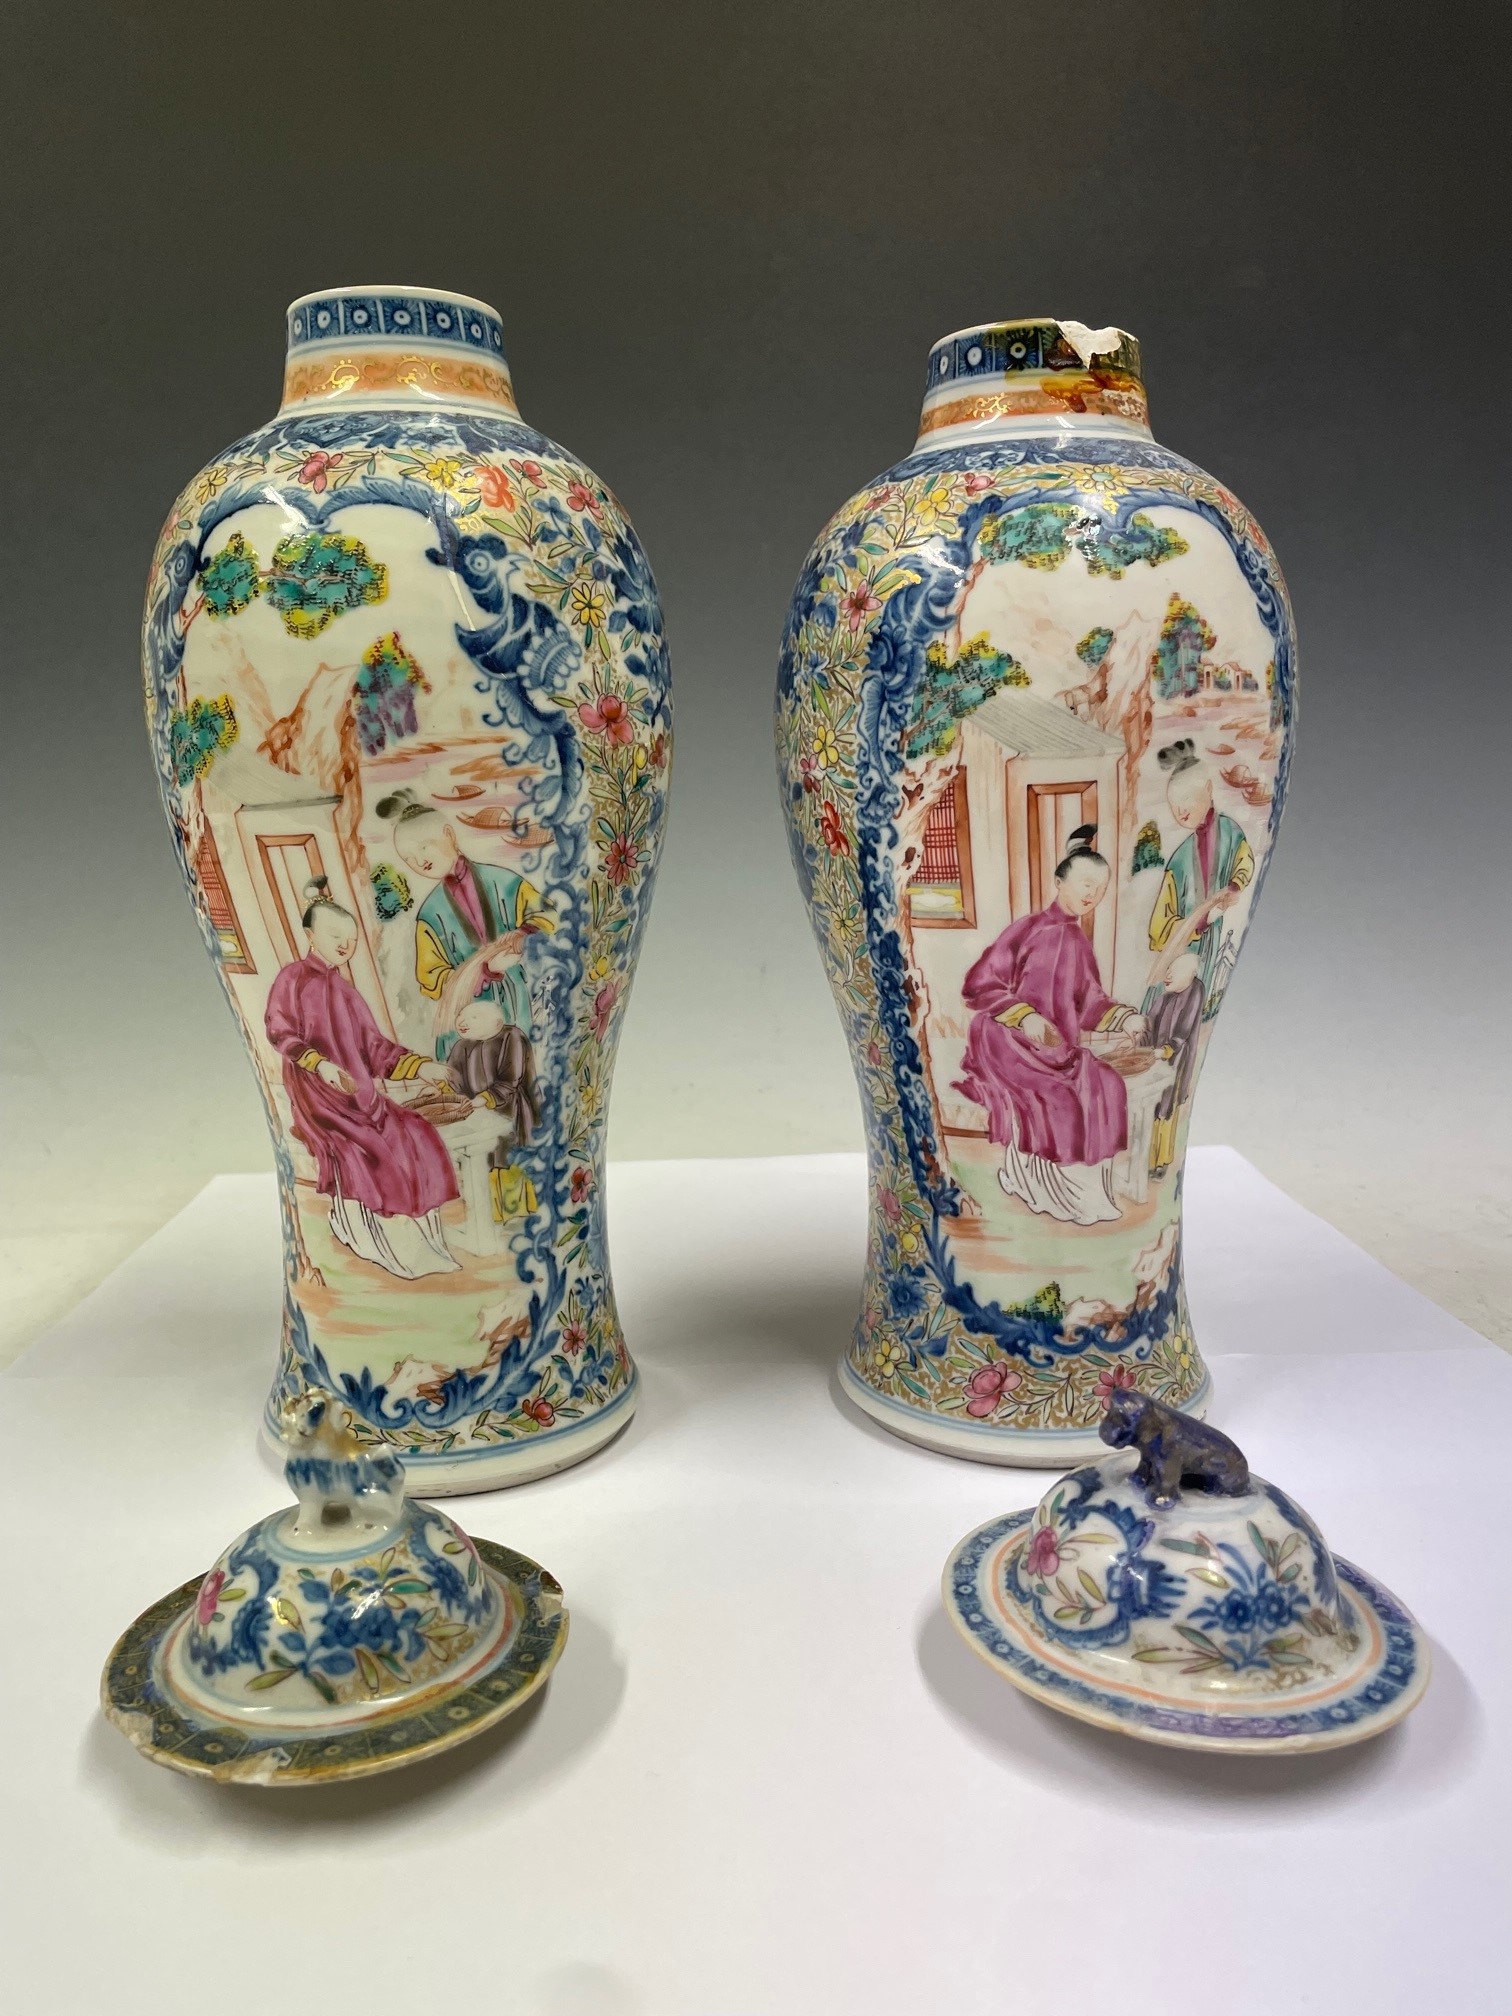 A PAIR OF CHINESE PORCELAIN BLUE AND WHITE JARS AND COVERS, QING DYNASTY, WITH FAMILLE ROSE ENAMEL - Image 4 of 7